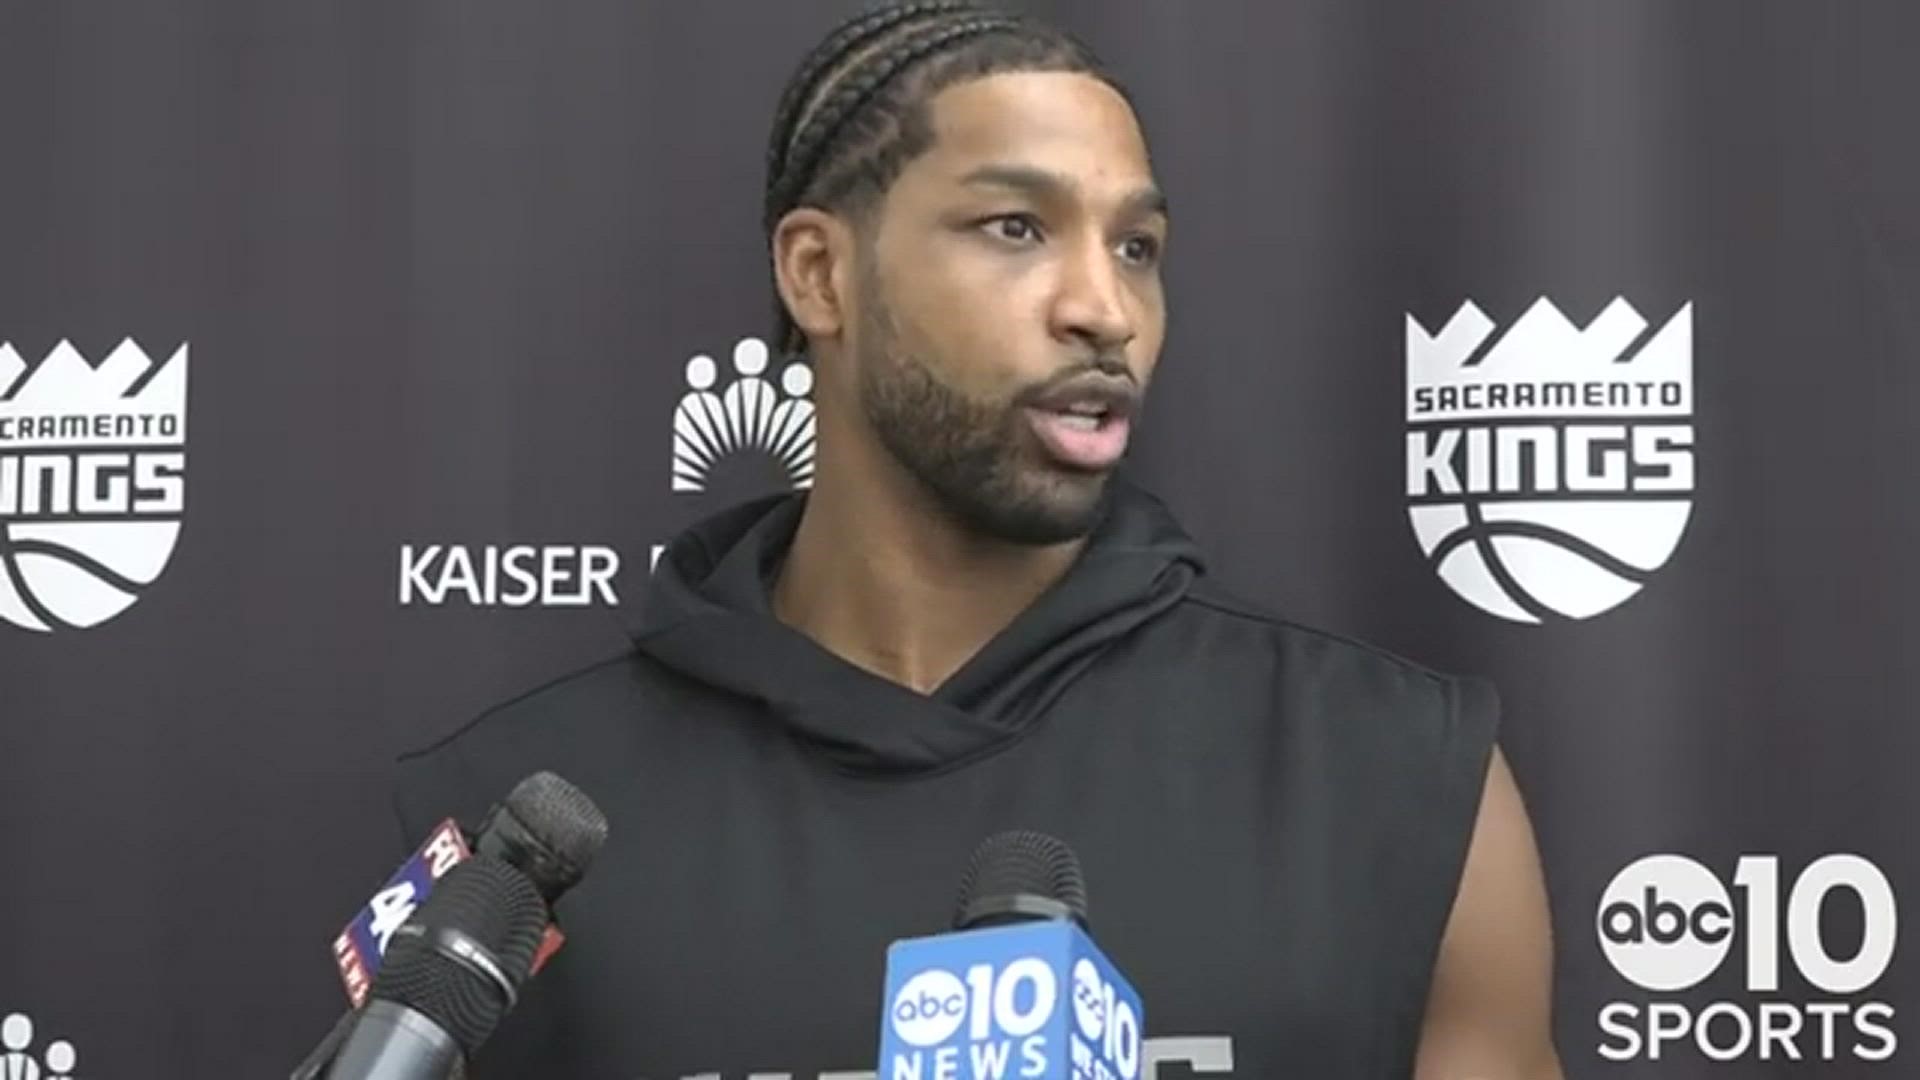 Tristan Thompson talks about the many things his team must clean up after a thrilling season opening win in Portland and looks ahead to the Kings' home opener.